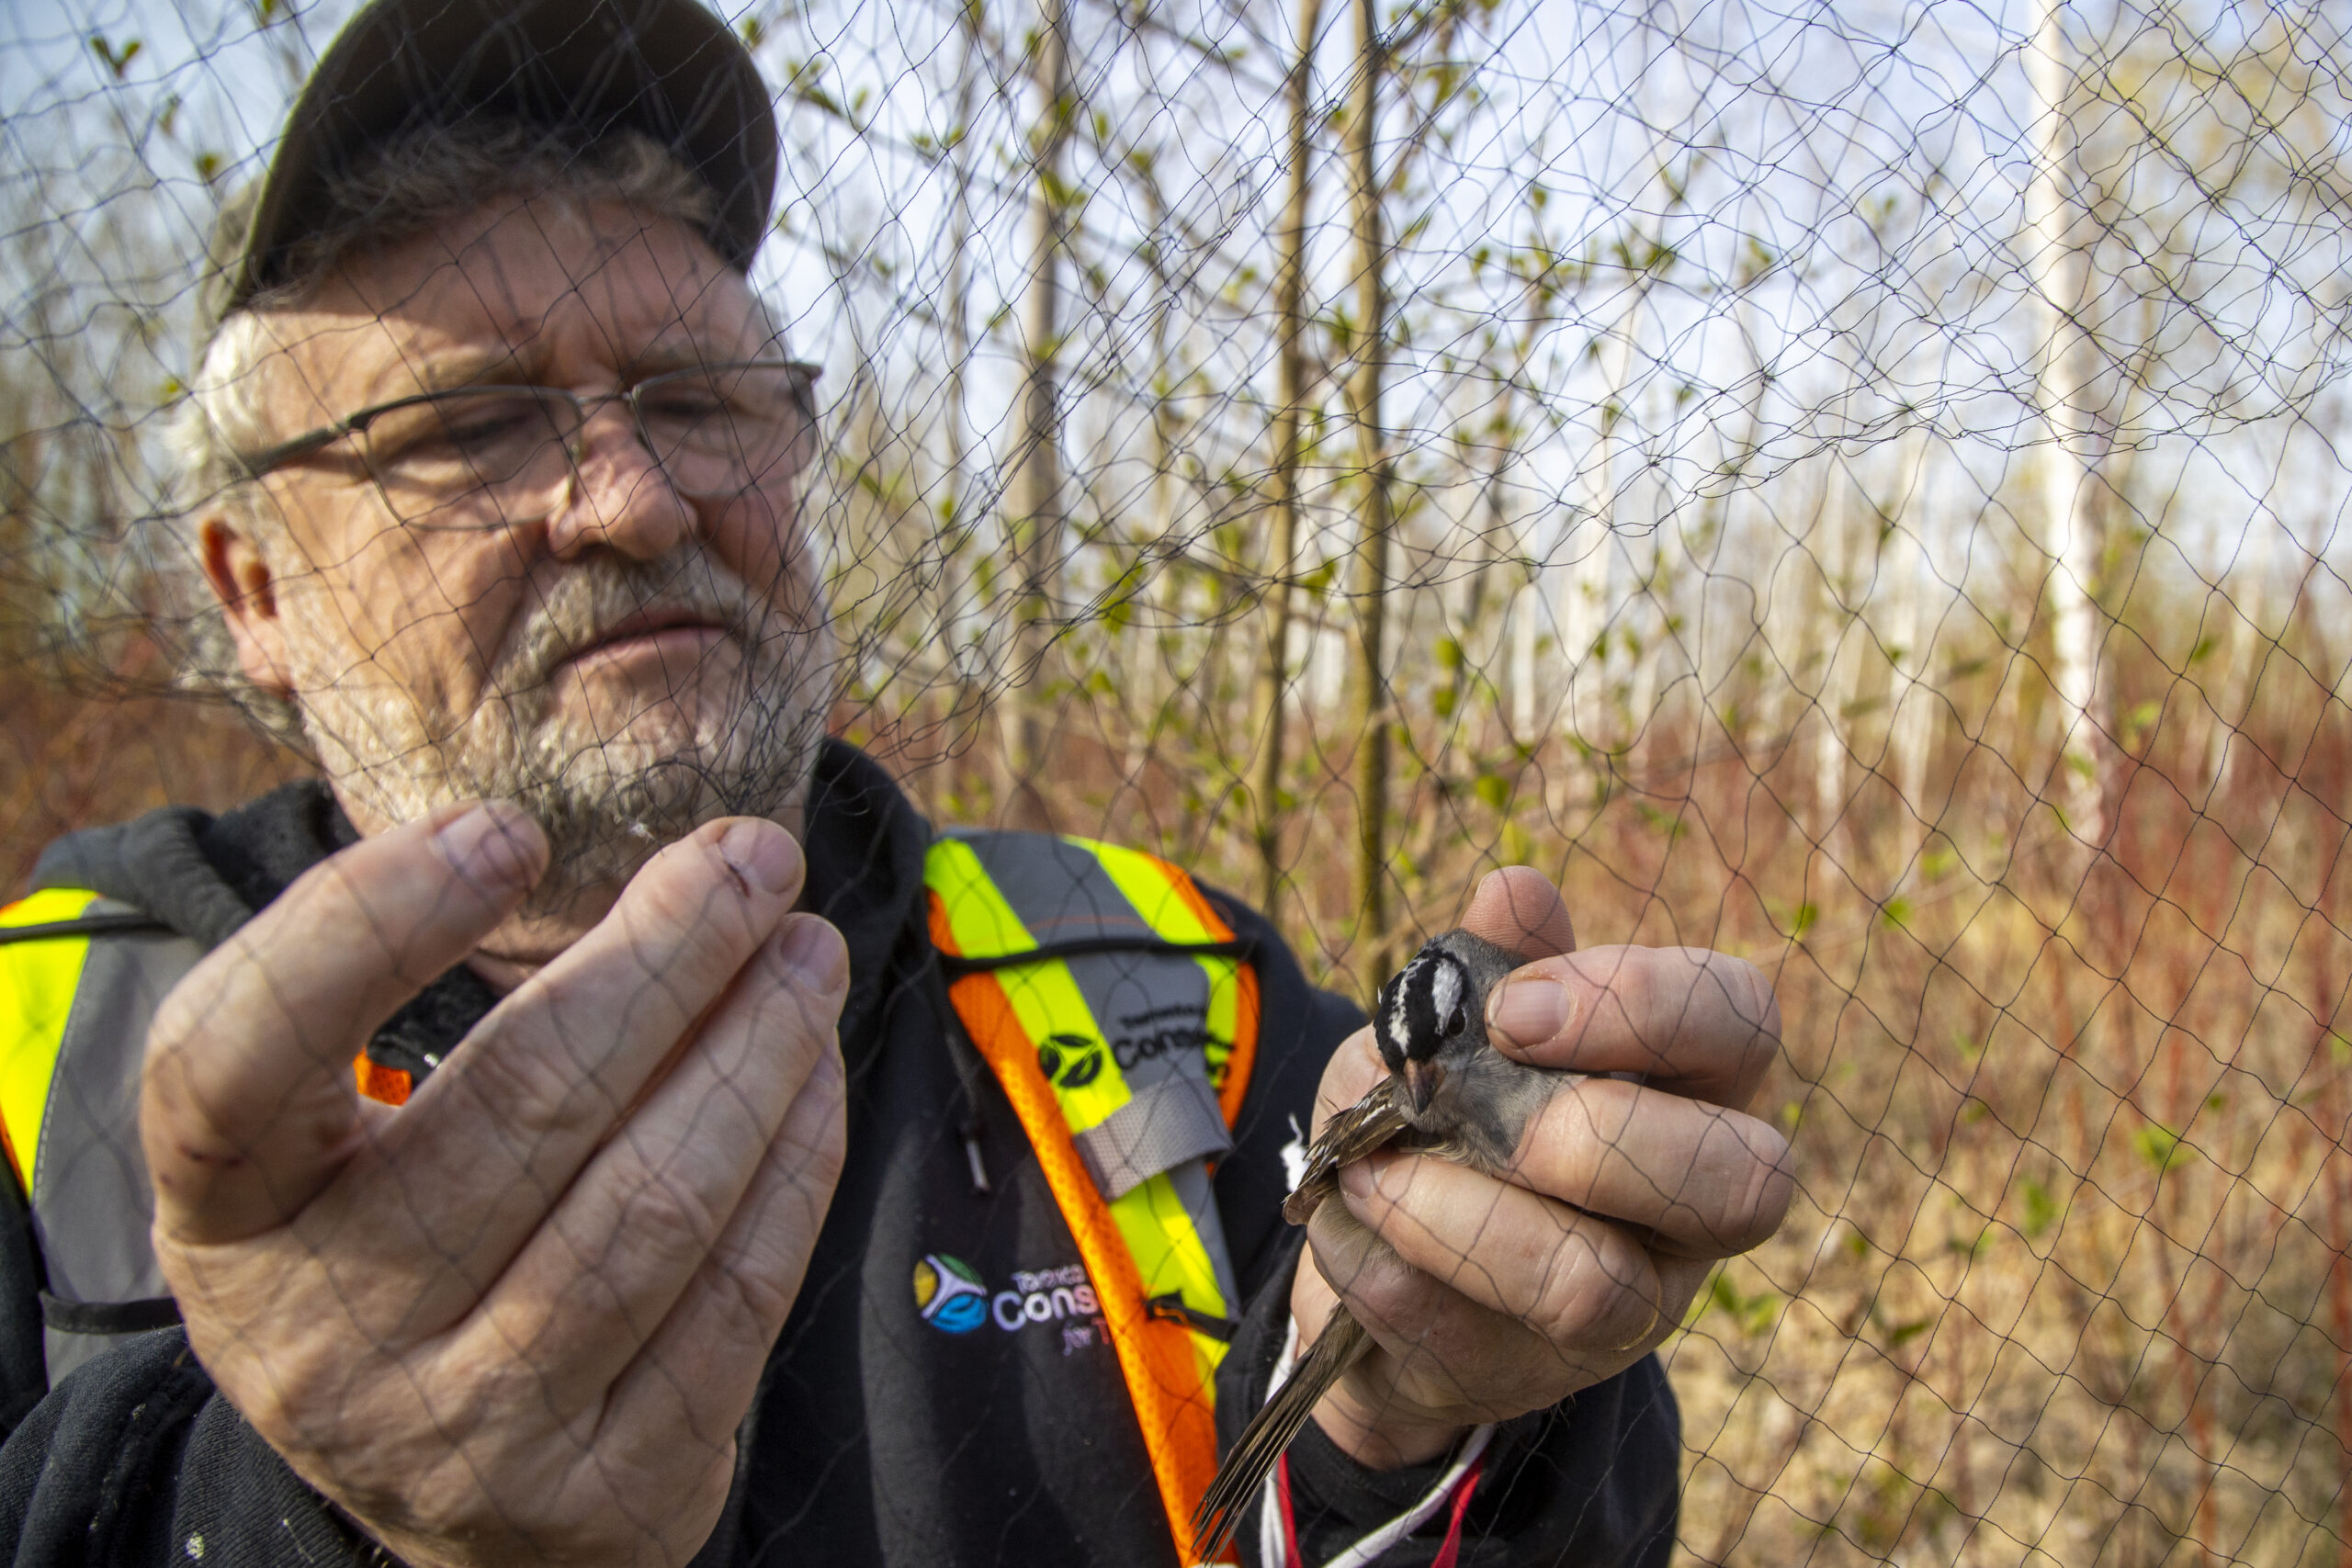 A man wearing glasses and a baseball cap pulls a sparrow, which looks directly at the camera, out of a net near  Tommy Thompson Park Bird Research Station.